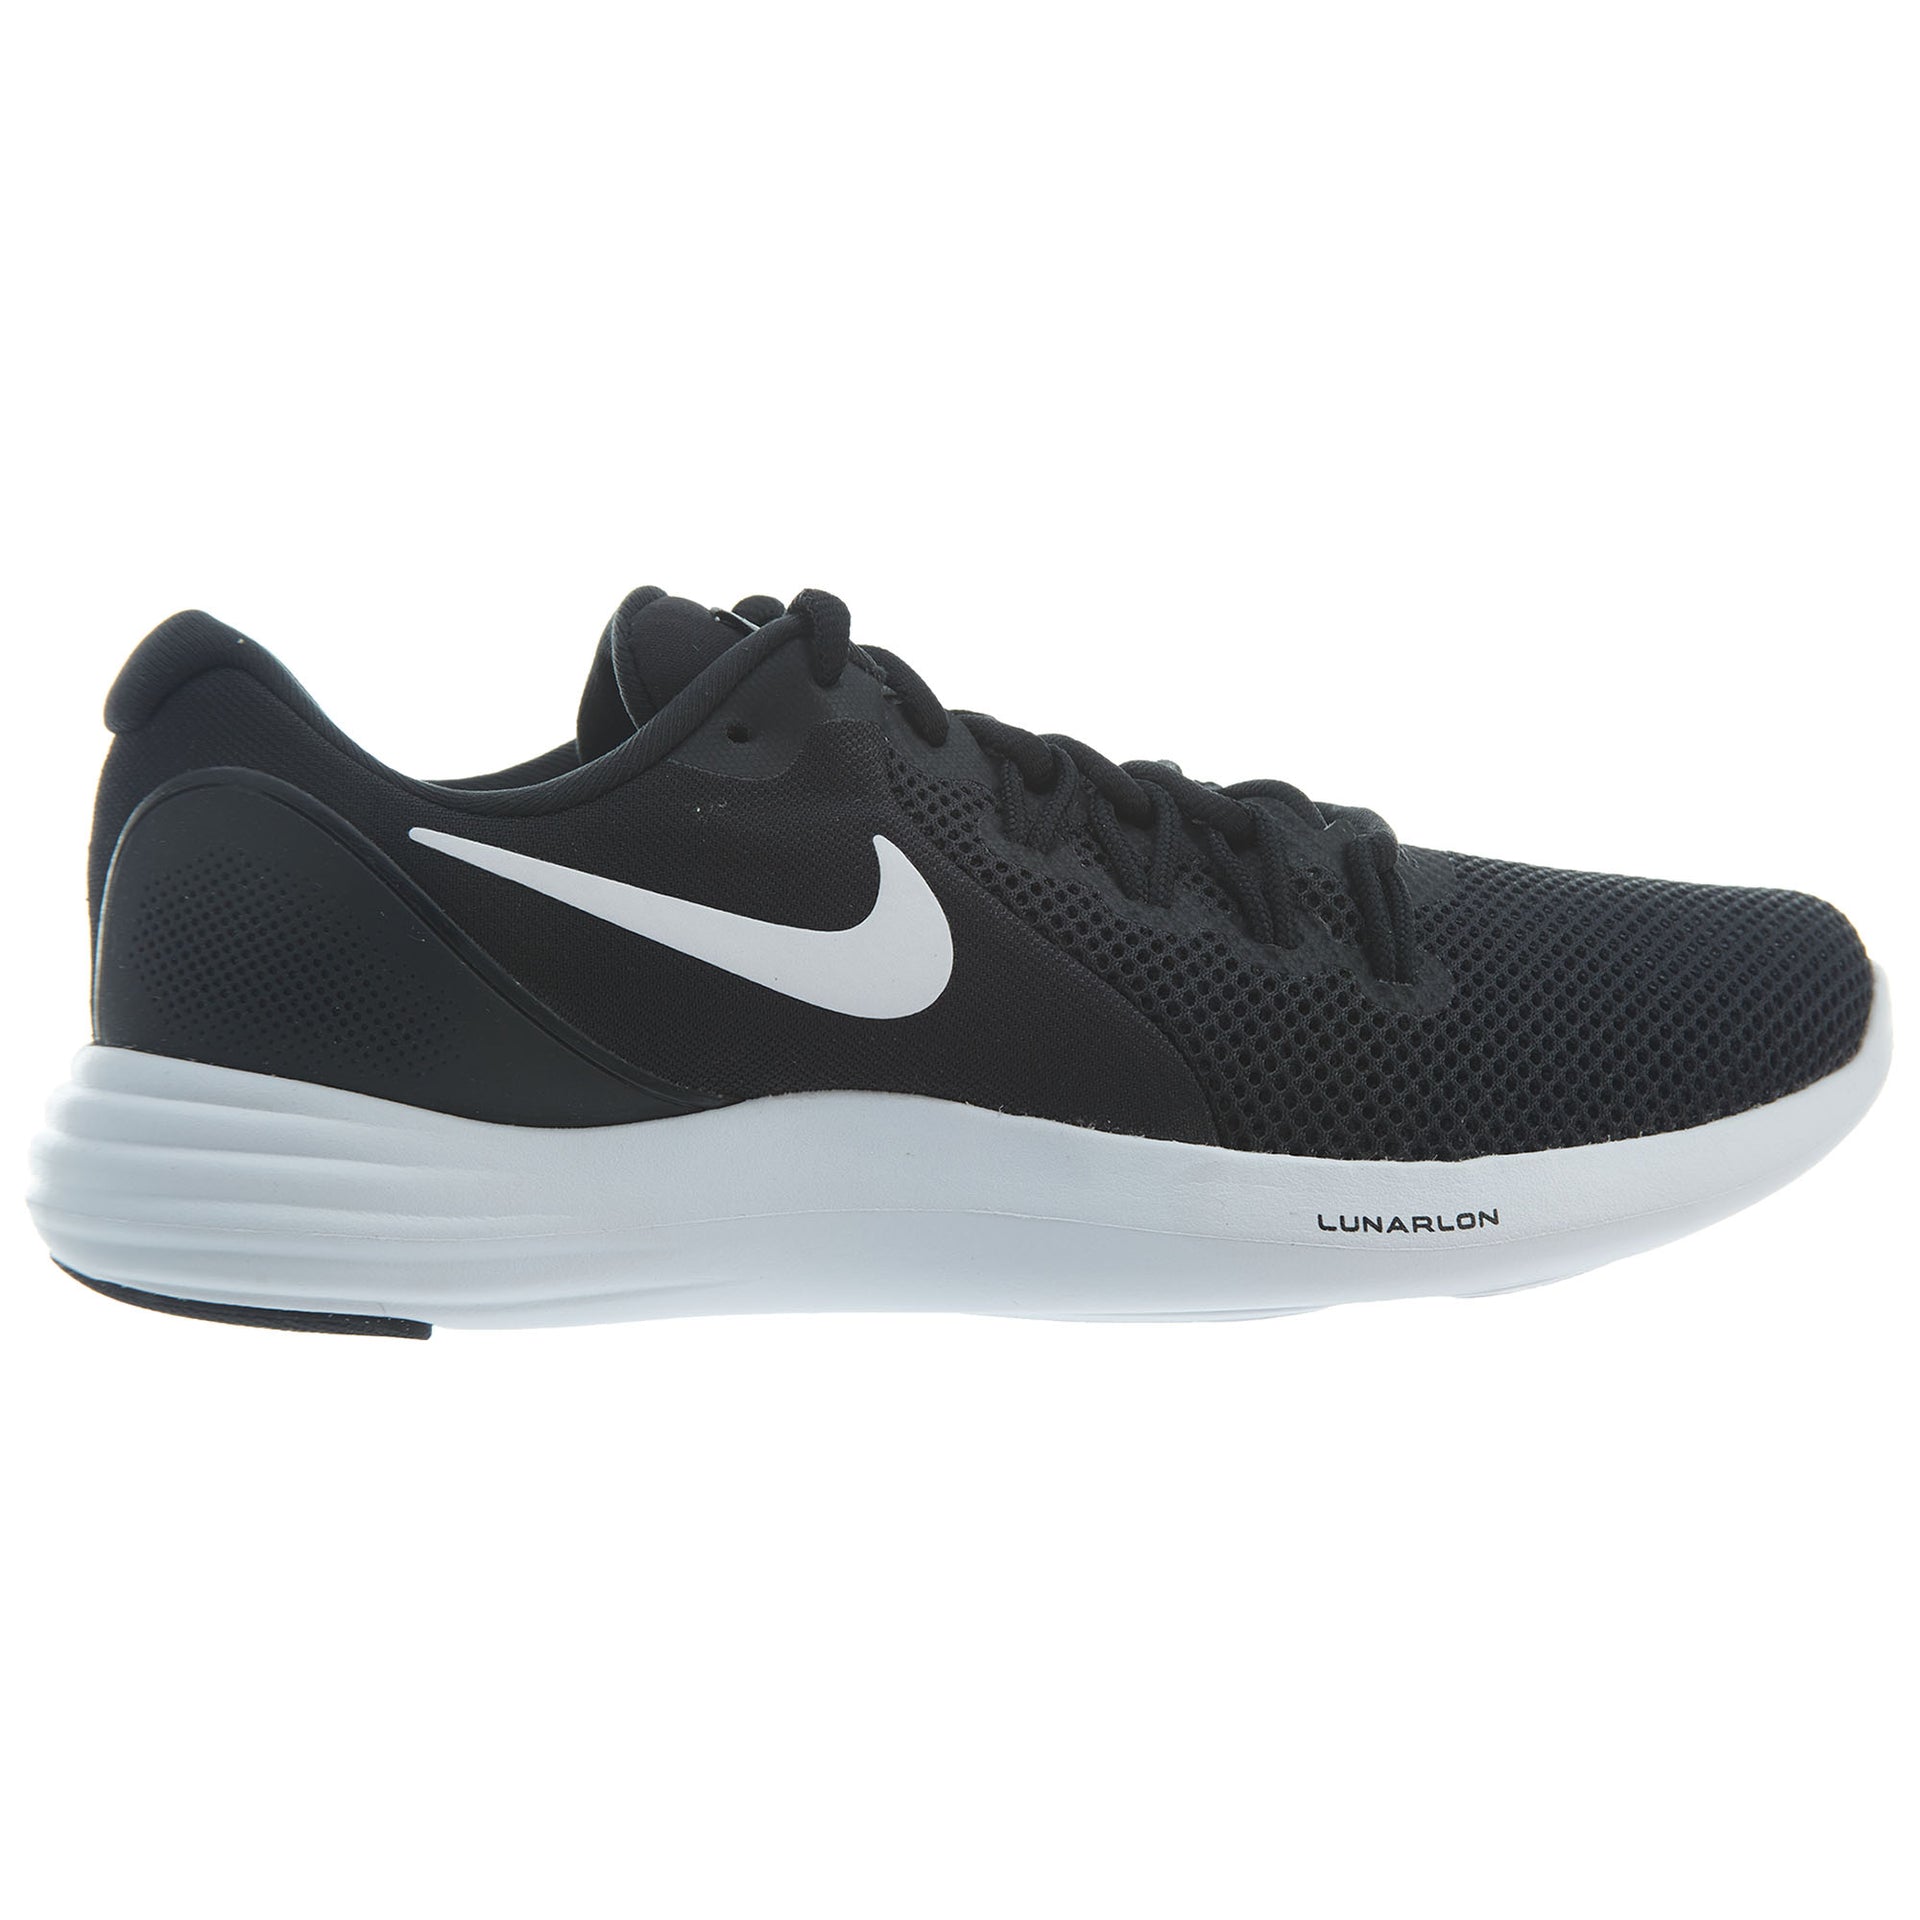 Nike Lunar Apparent Running Shoes Mens Style :908987